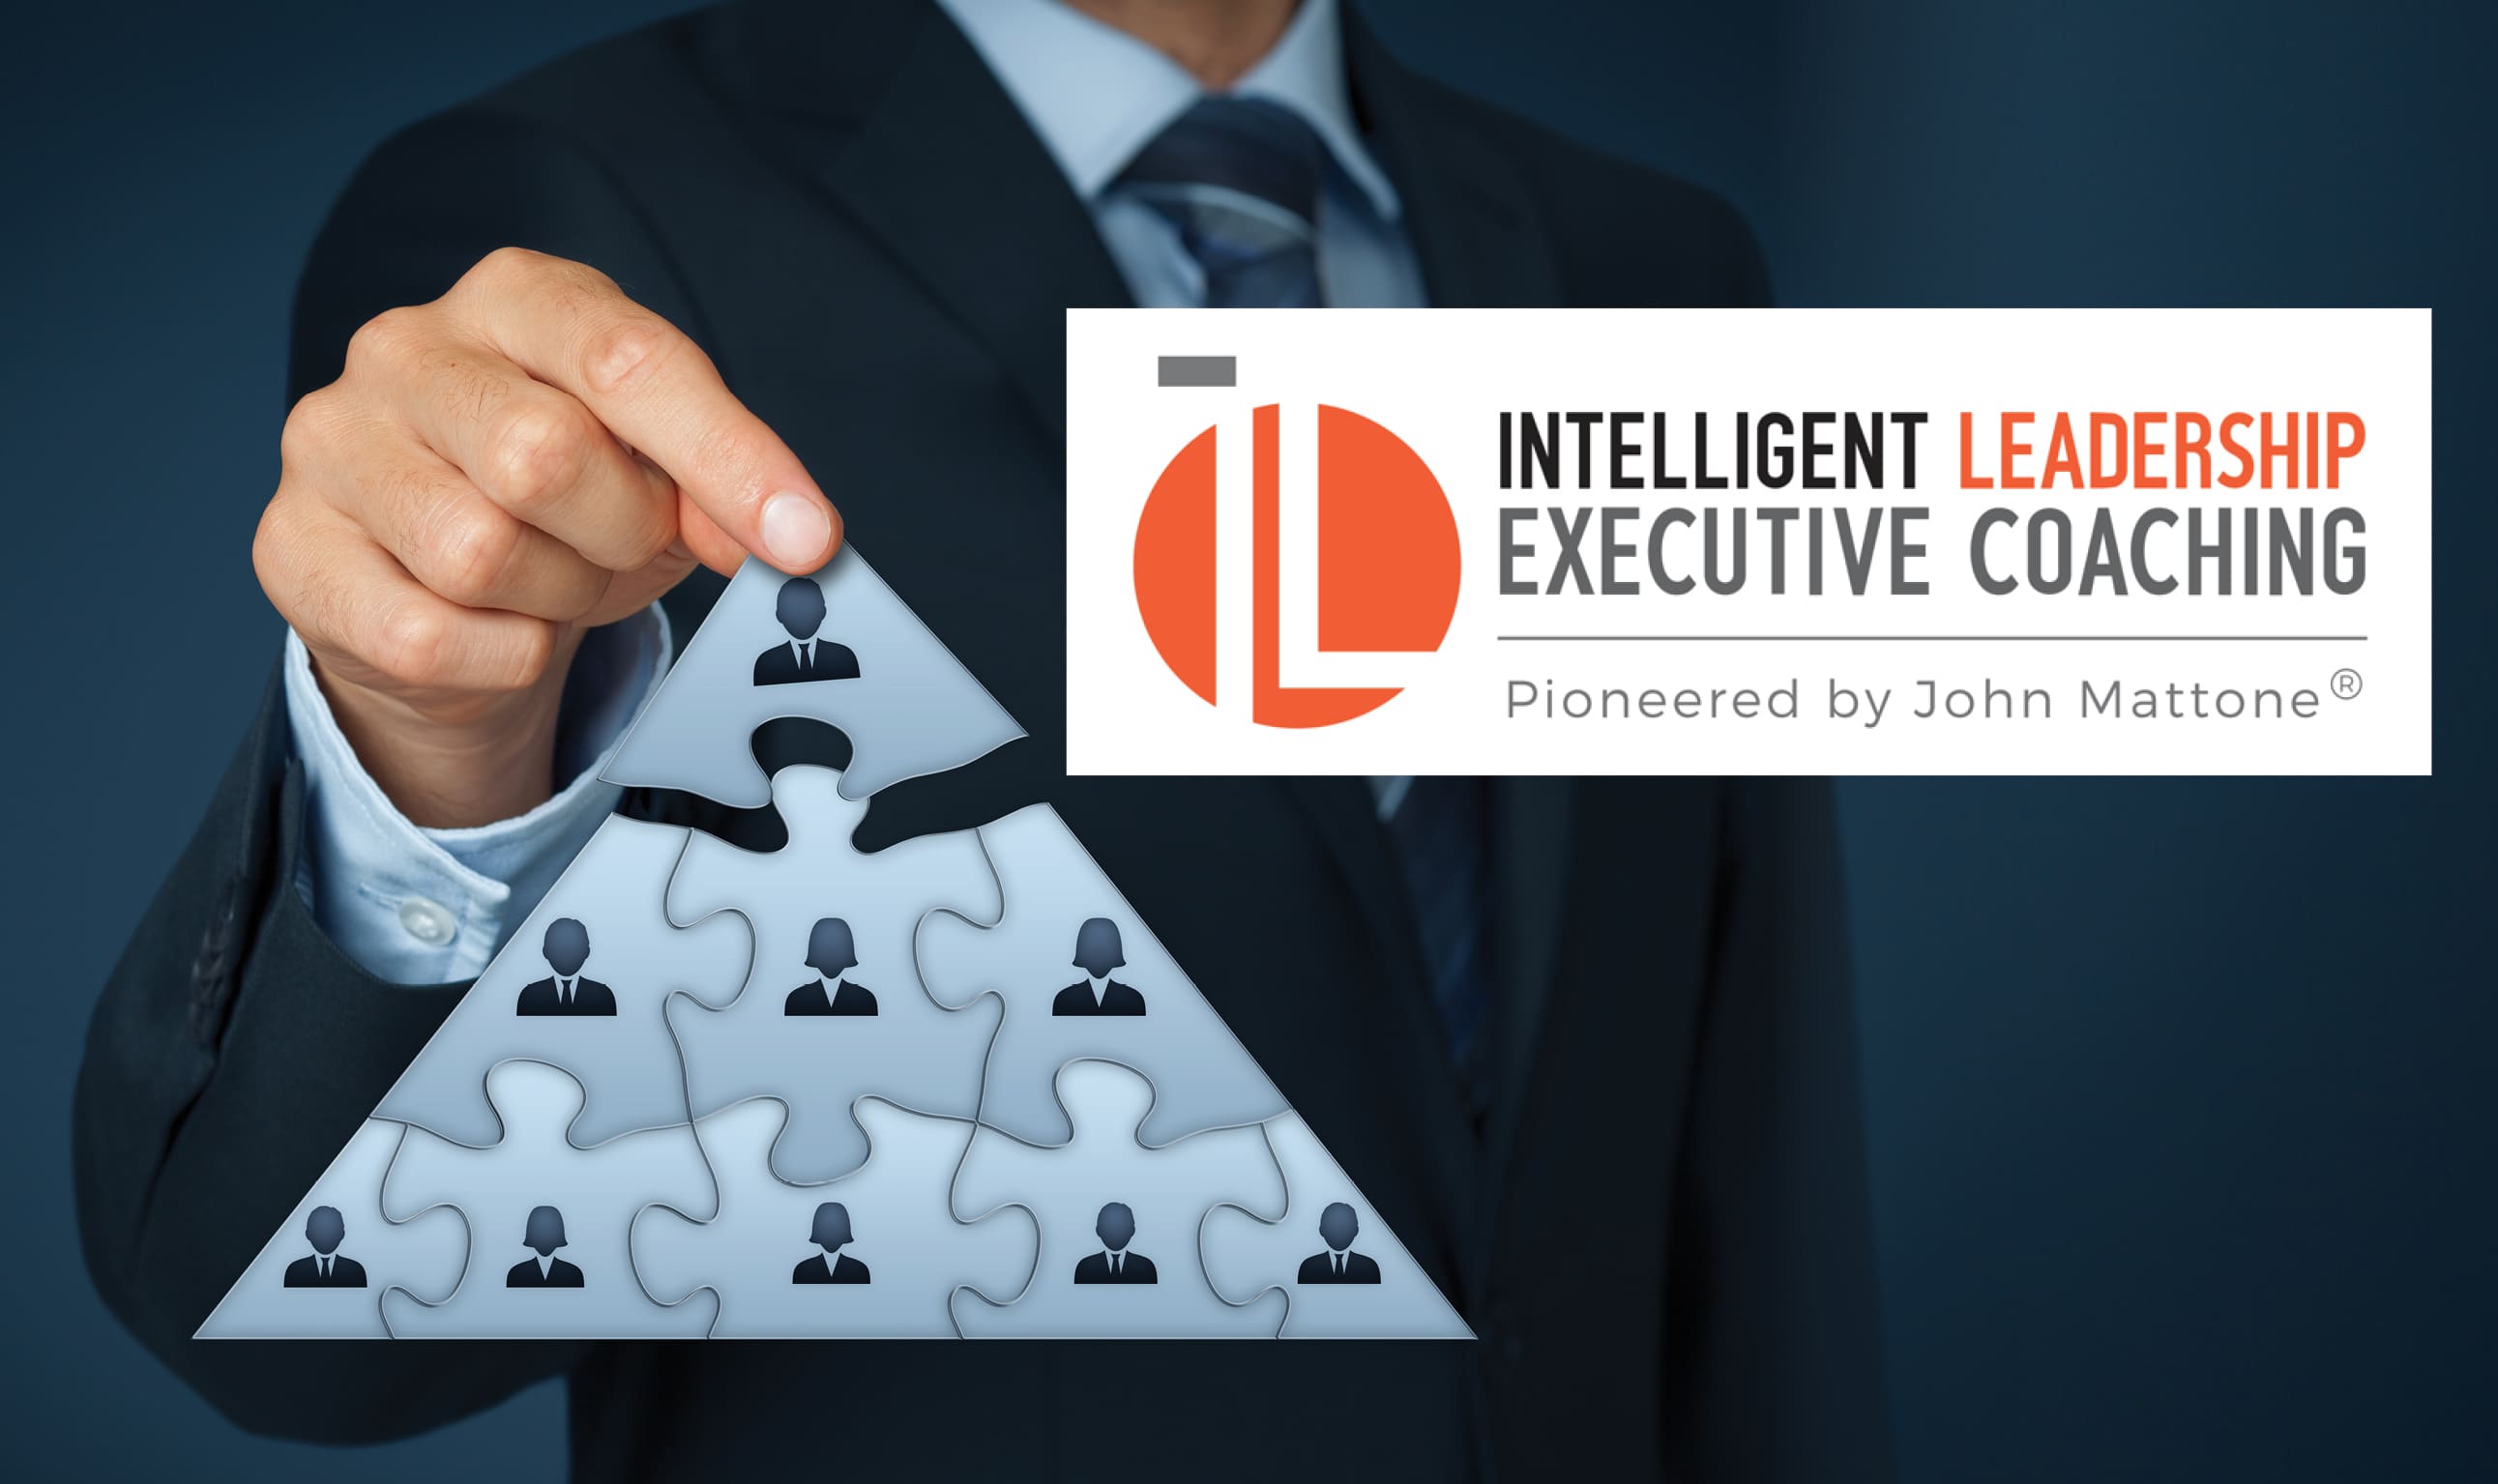 Intelligent Leadership Executive Coaching logo with man and puzzle pieces